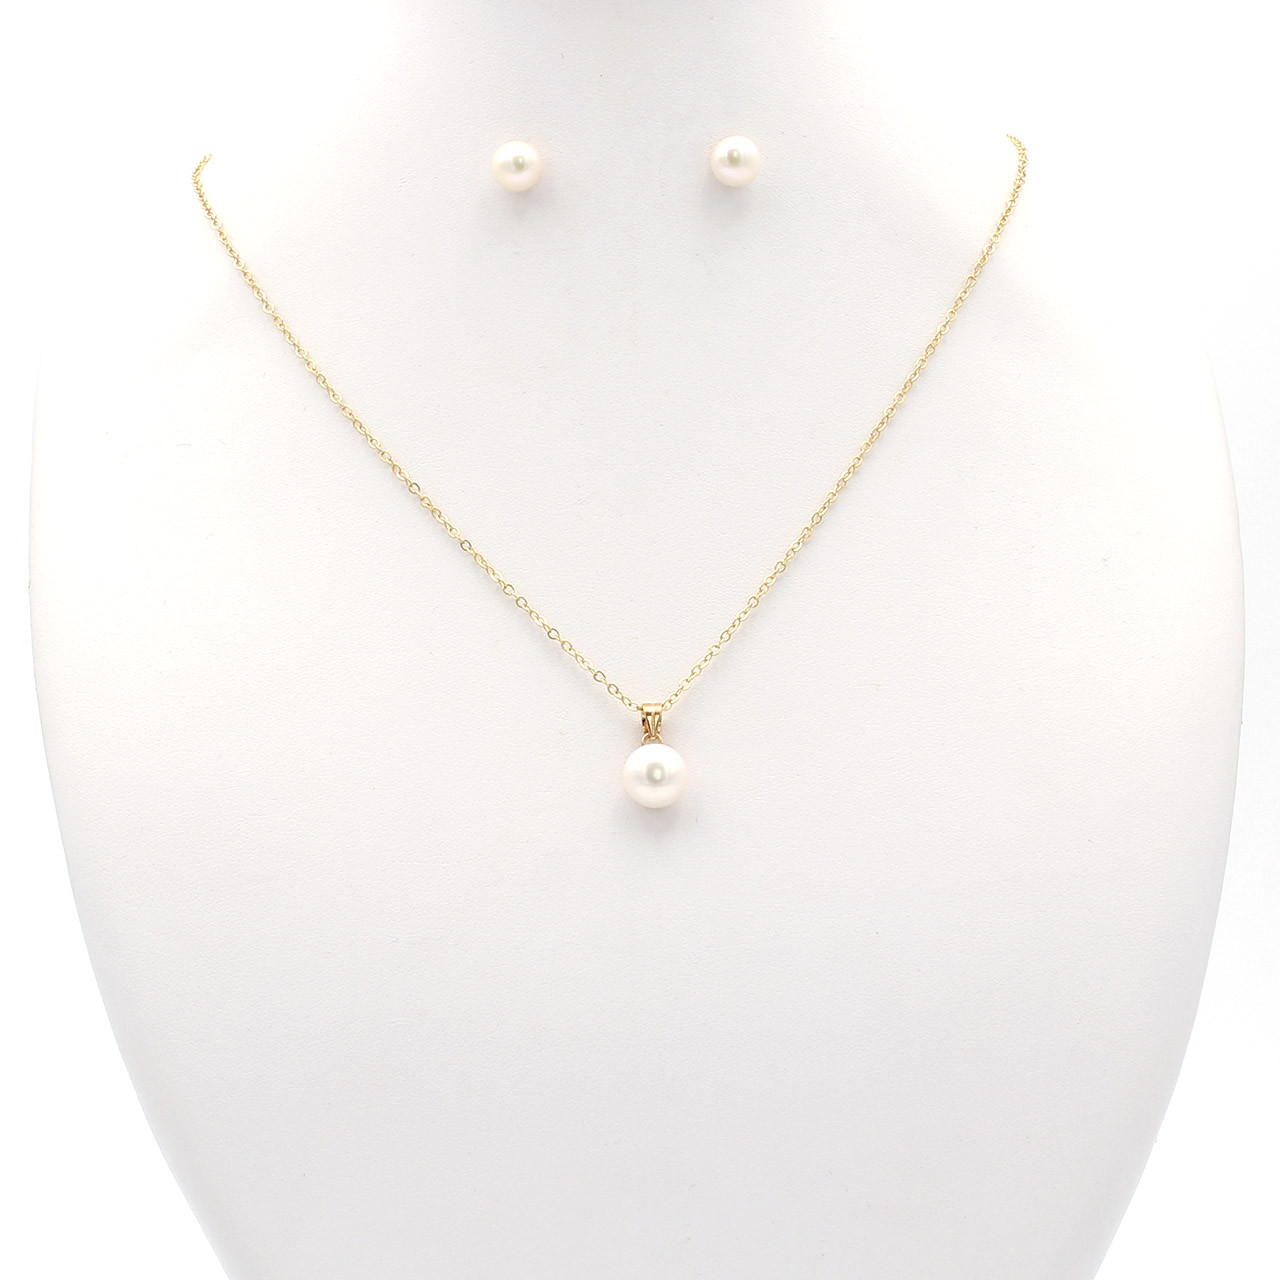 Modern Design Pearl Choker Set - Partywear Necklace with Swarovski Crystals  - Anaisha Gold Choker Necklace Set by Blingvine